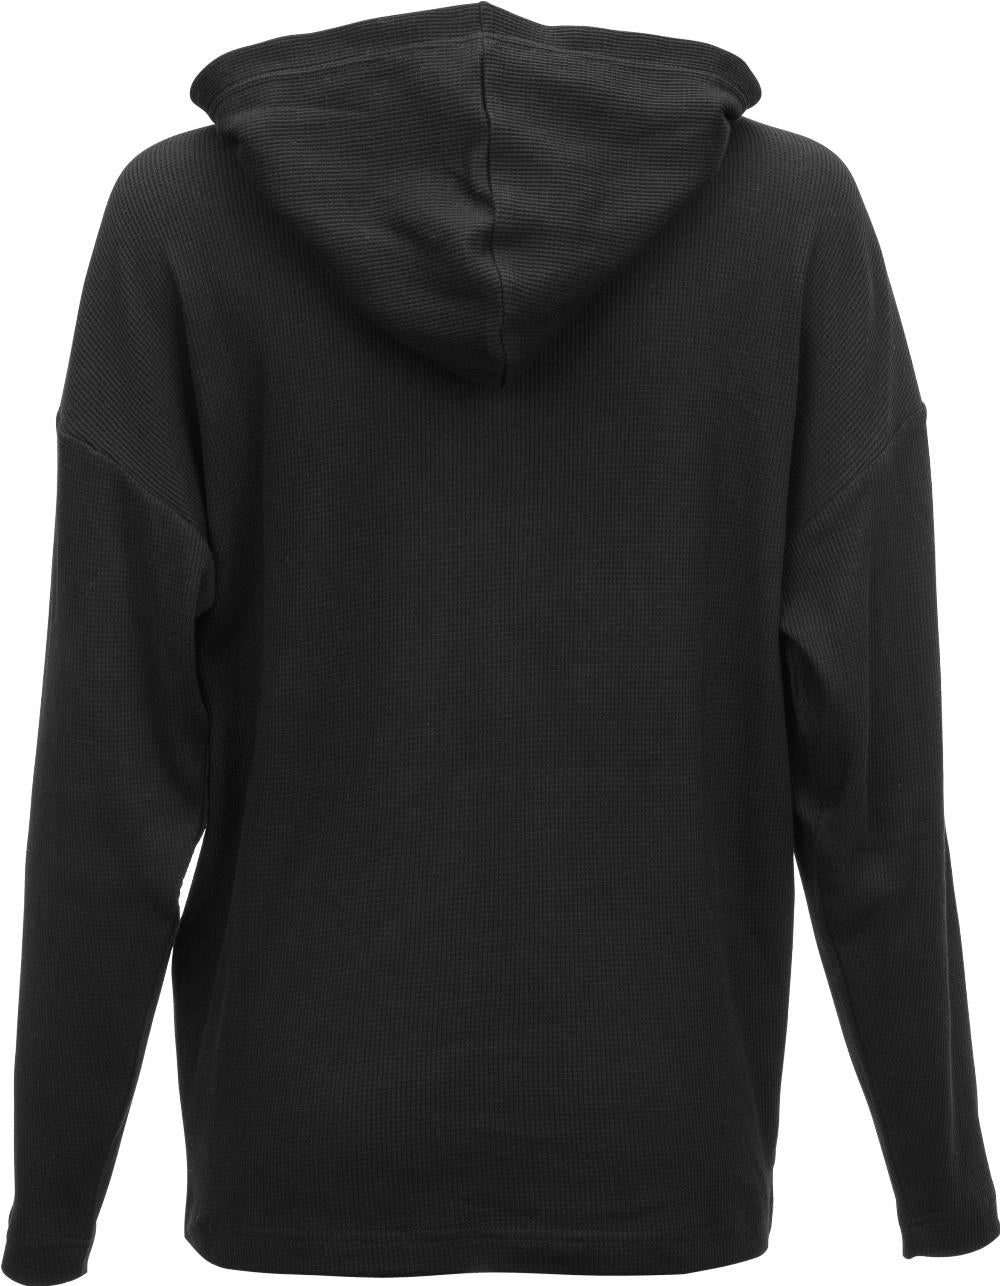 WOMEN'S FLY OVERSIZED THERMAL HOODIE BLACK MD#mpn_358-0140M